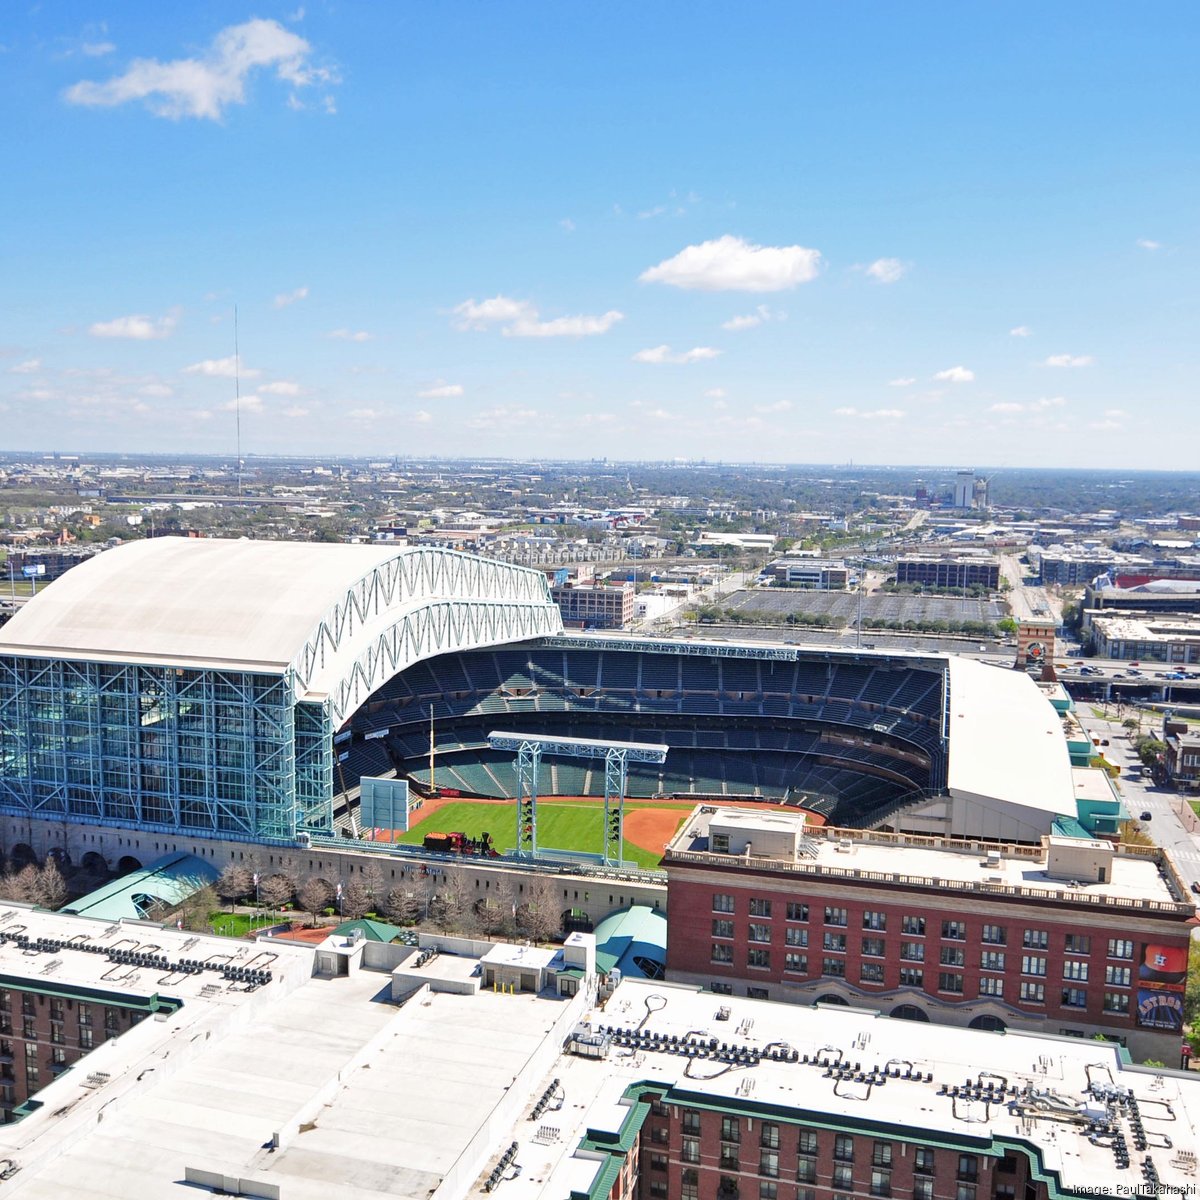 The Future of Minute Maid Park